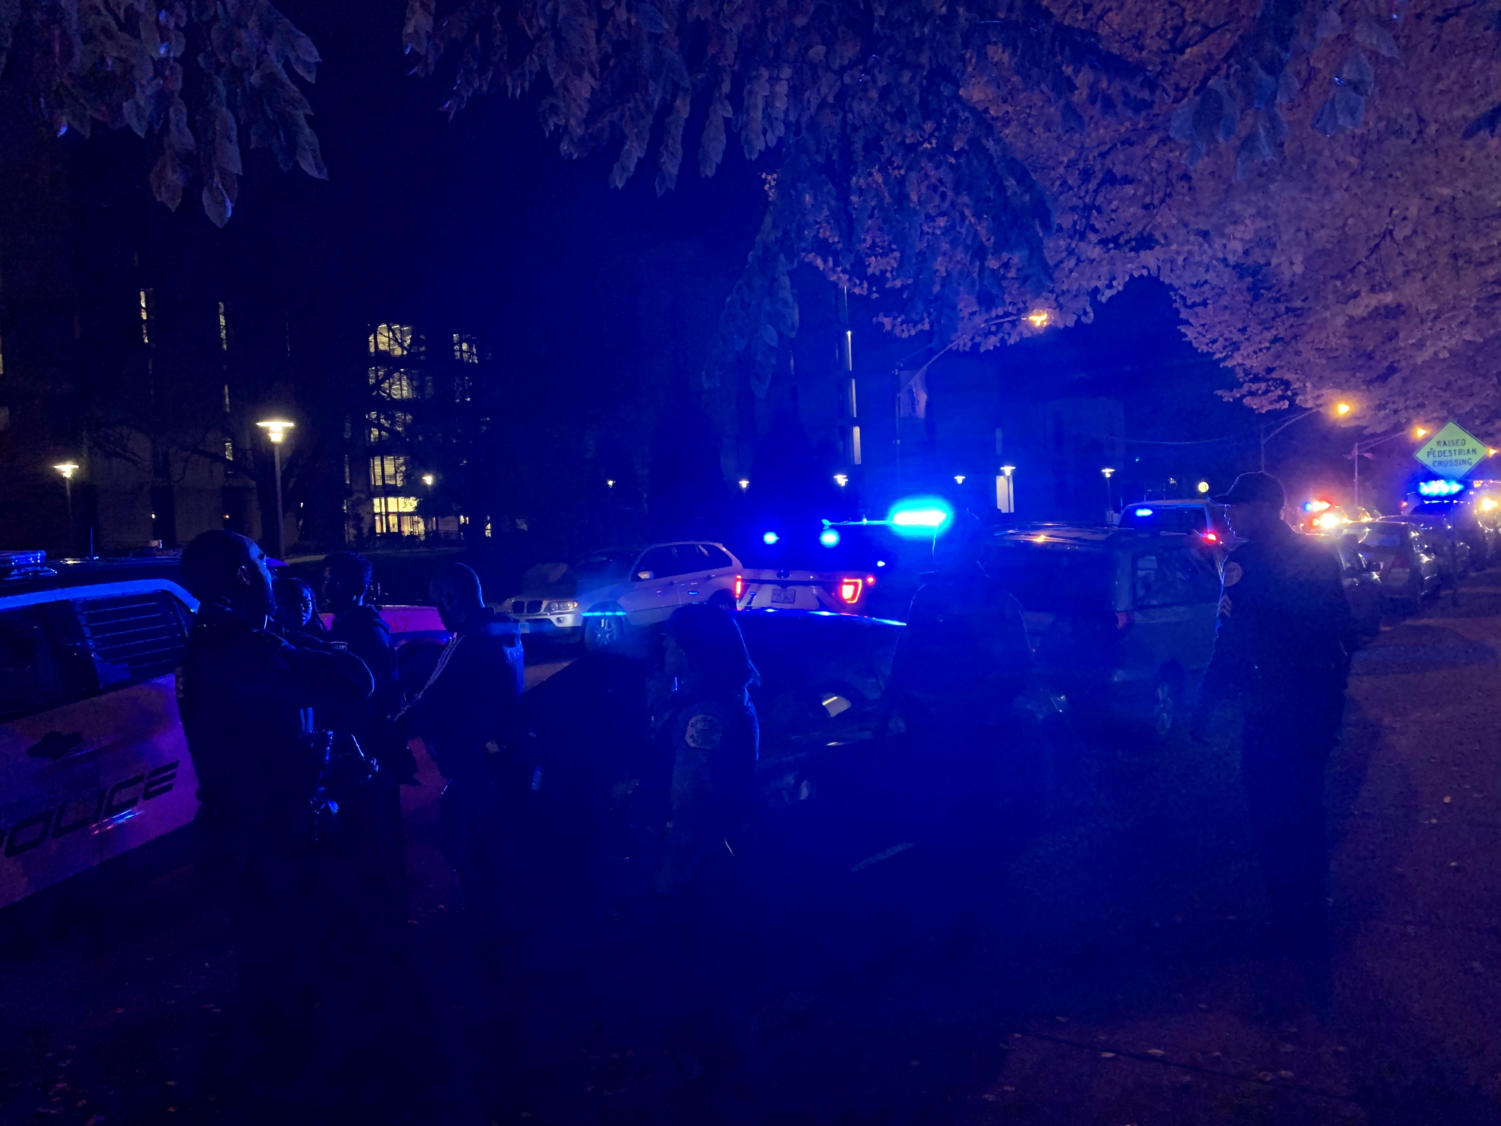 A young man was arrested in front of the Regenstein Library at around 10:45 p.m. Police on scene said that he was chased on foot and suspected of committing a robbery. It is unclear if he was linked to the battery of a student nearby.